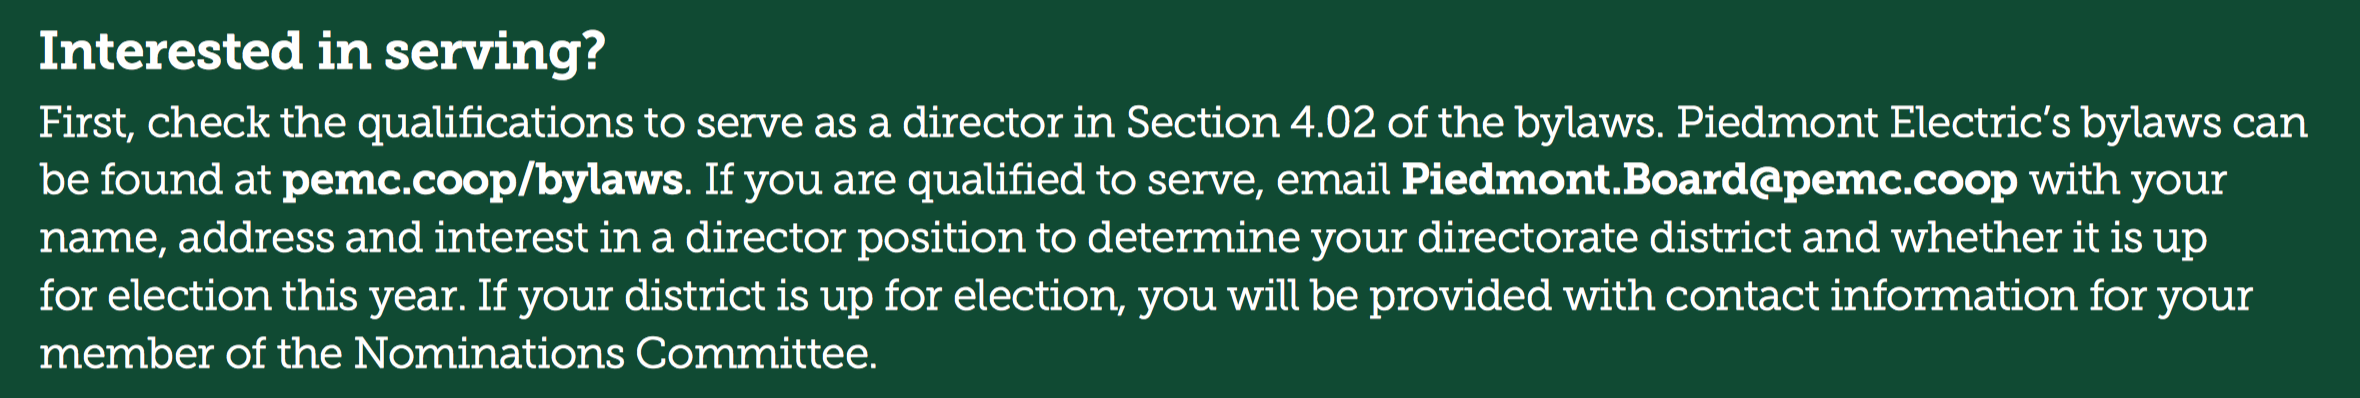 Interested in serving? First, check the qualifications to serve as a director in Section 4.02 of the bylaws. Piedmont Electric’s bylaws can be found at pemc.coop/bylaws. If you are qualified to serve, email Piedmont.Board@pemc.coop with your name, address and interest in a director position to determine your directorate district and whether it is up for election this year. If your district is up for election, you will be provided with contact information for your member of the Nominations Committee.